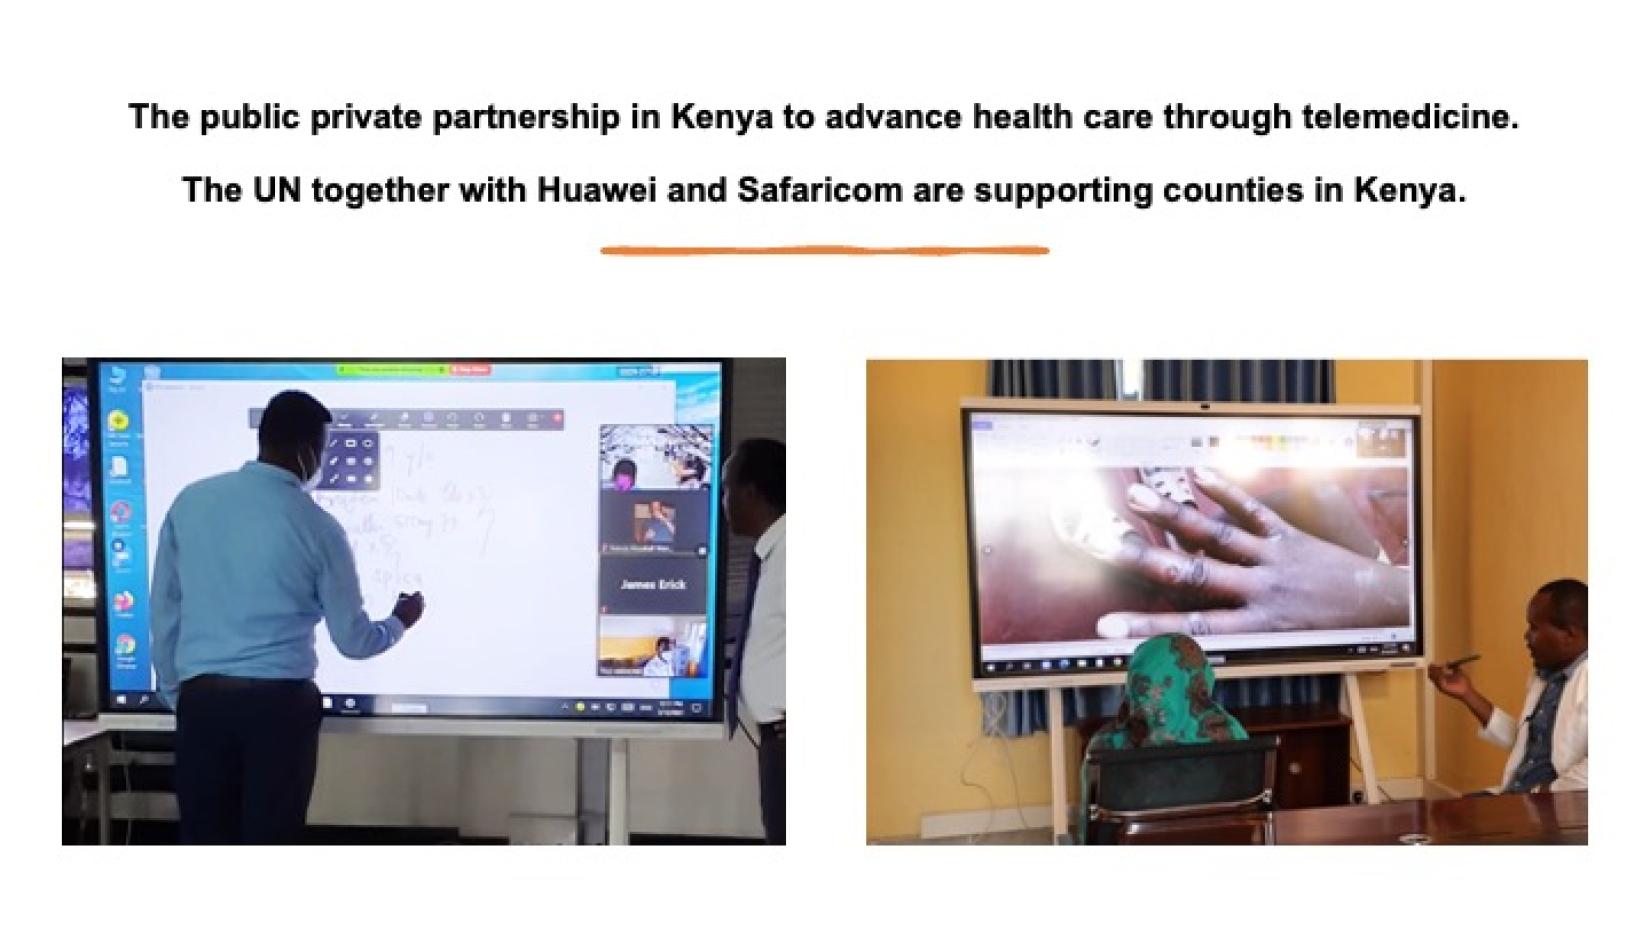 The public private partnership in Kenya to advance health care through telemedicine.The UN together with Huawei and Safaricom are supporting counties in Kenya.